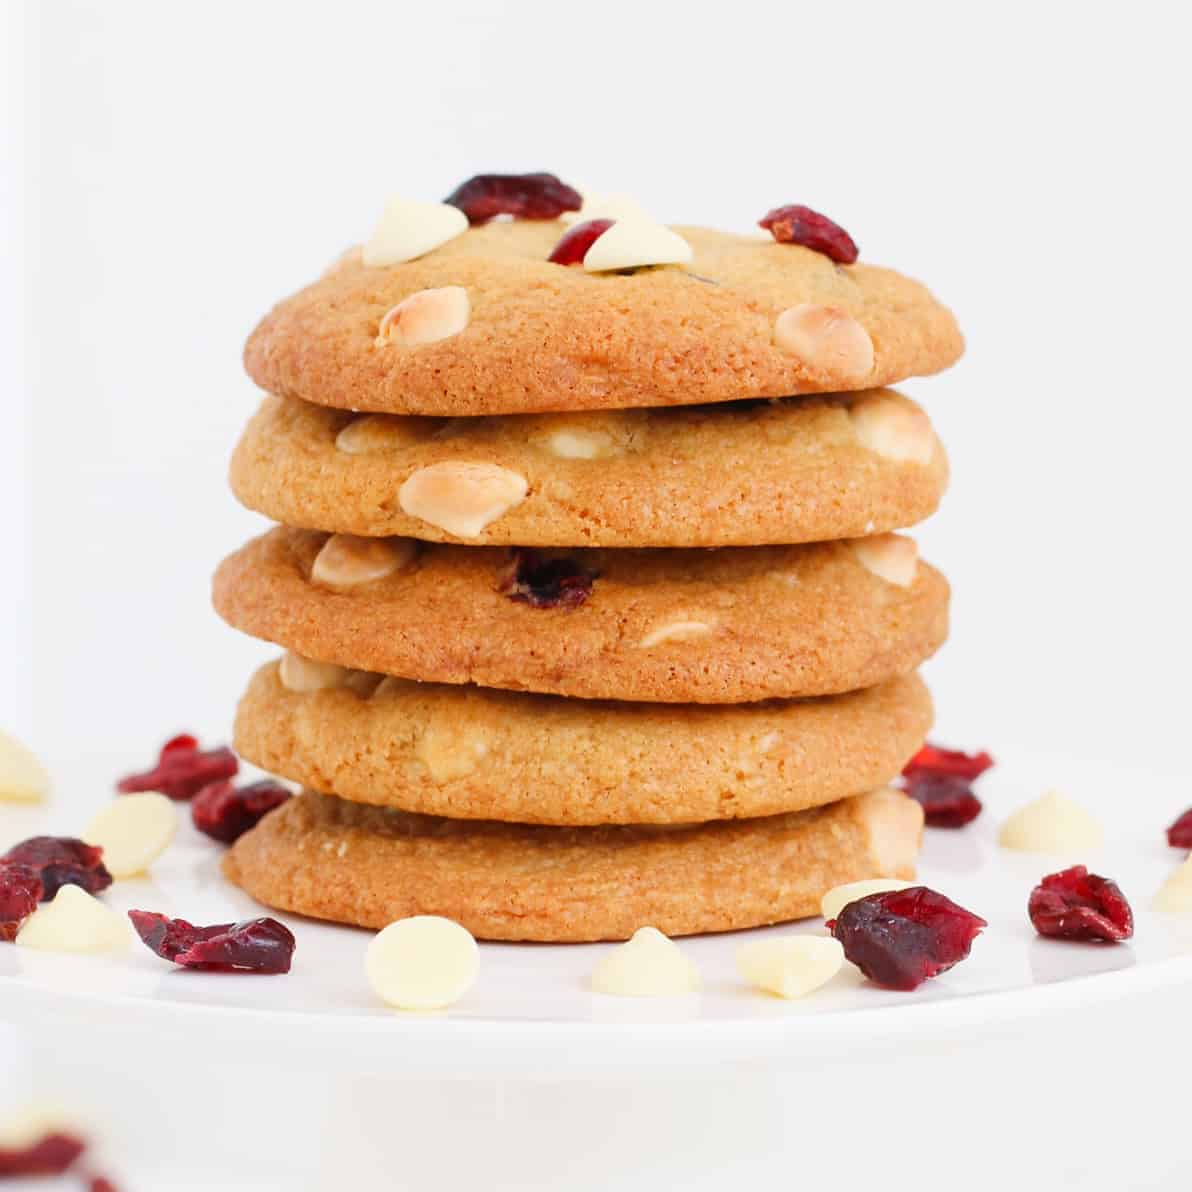 A stack of cookies with white chocolate chips and cranberries.